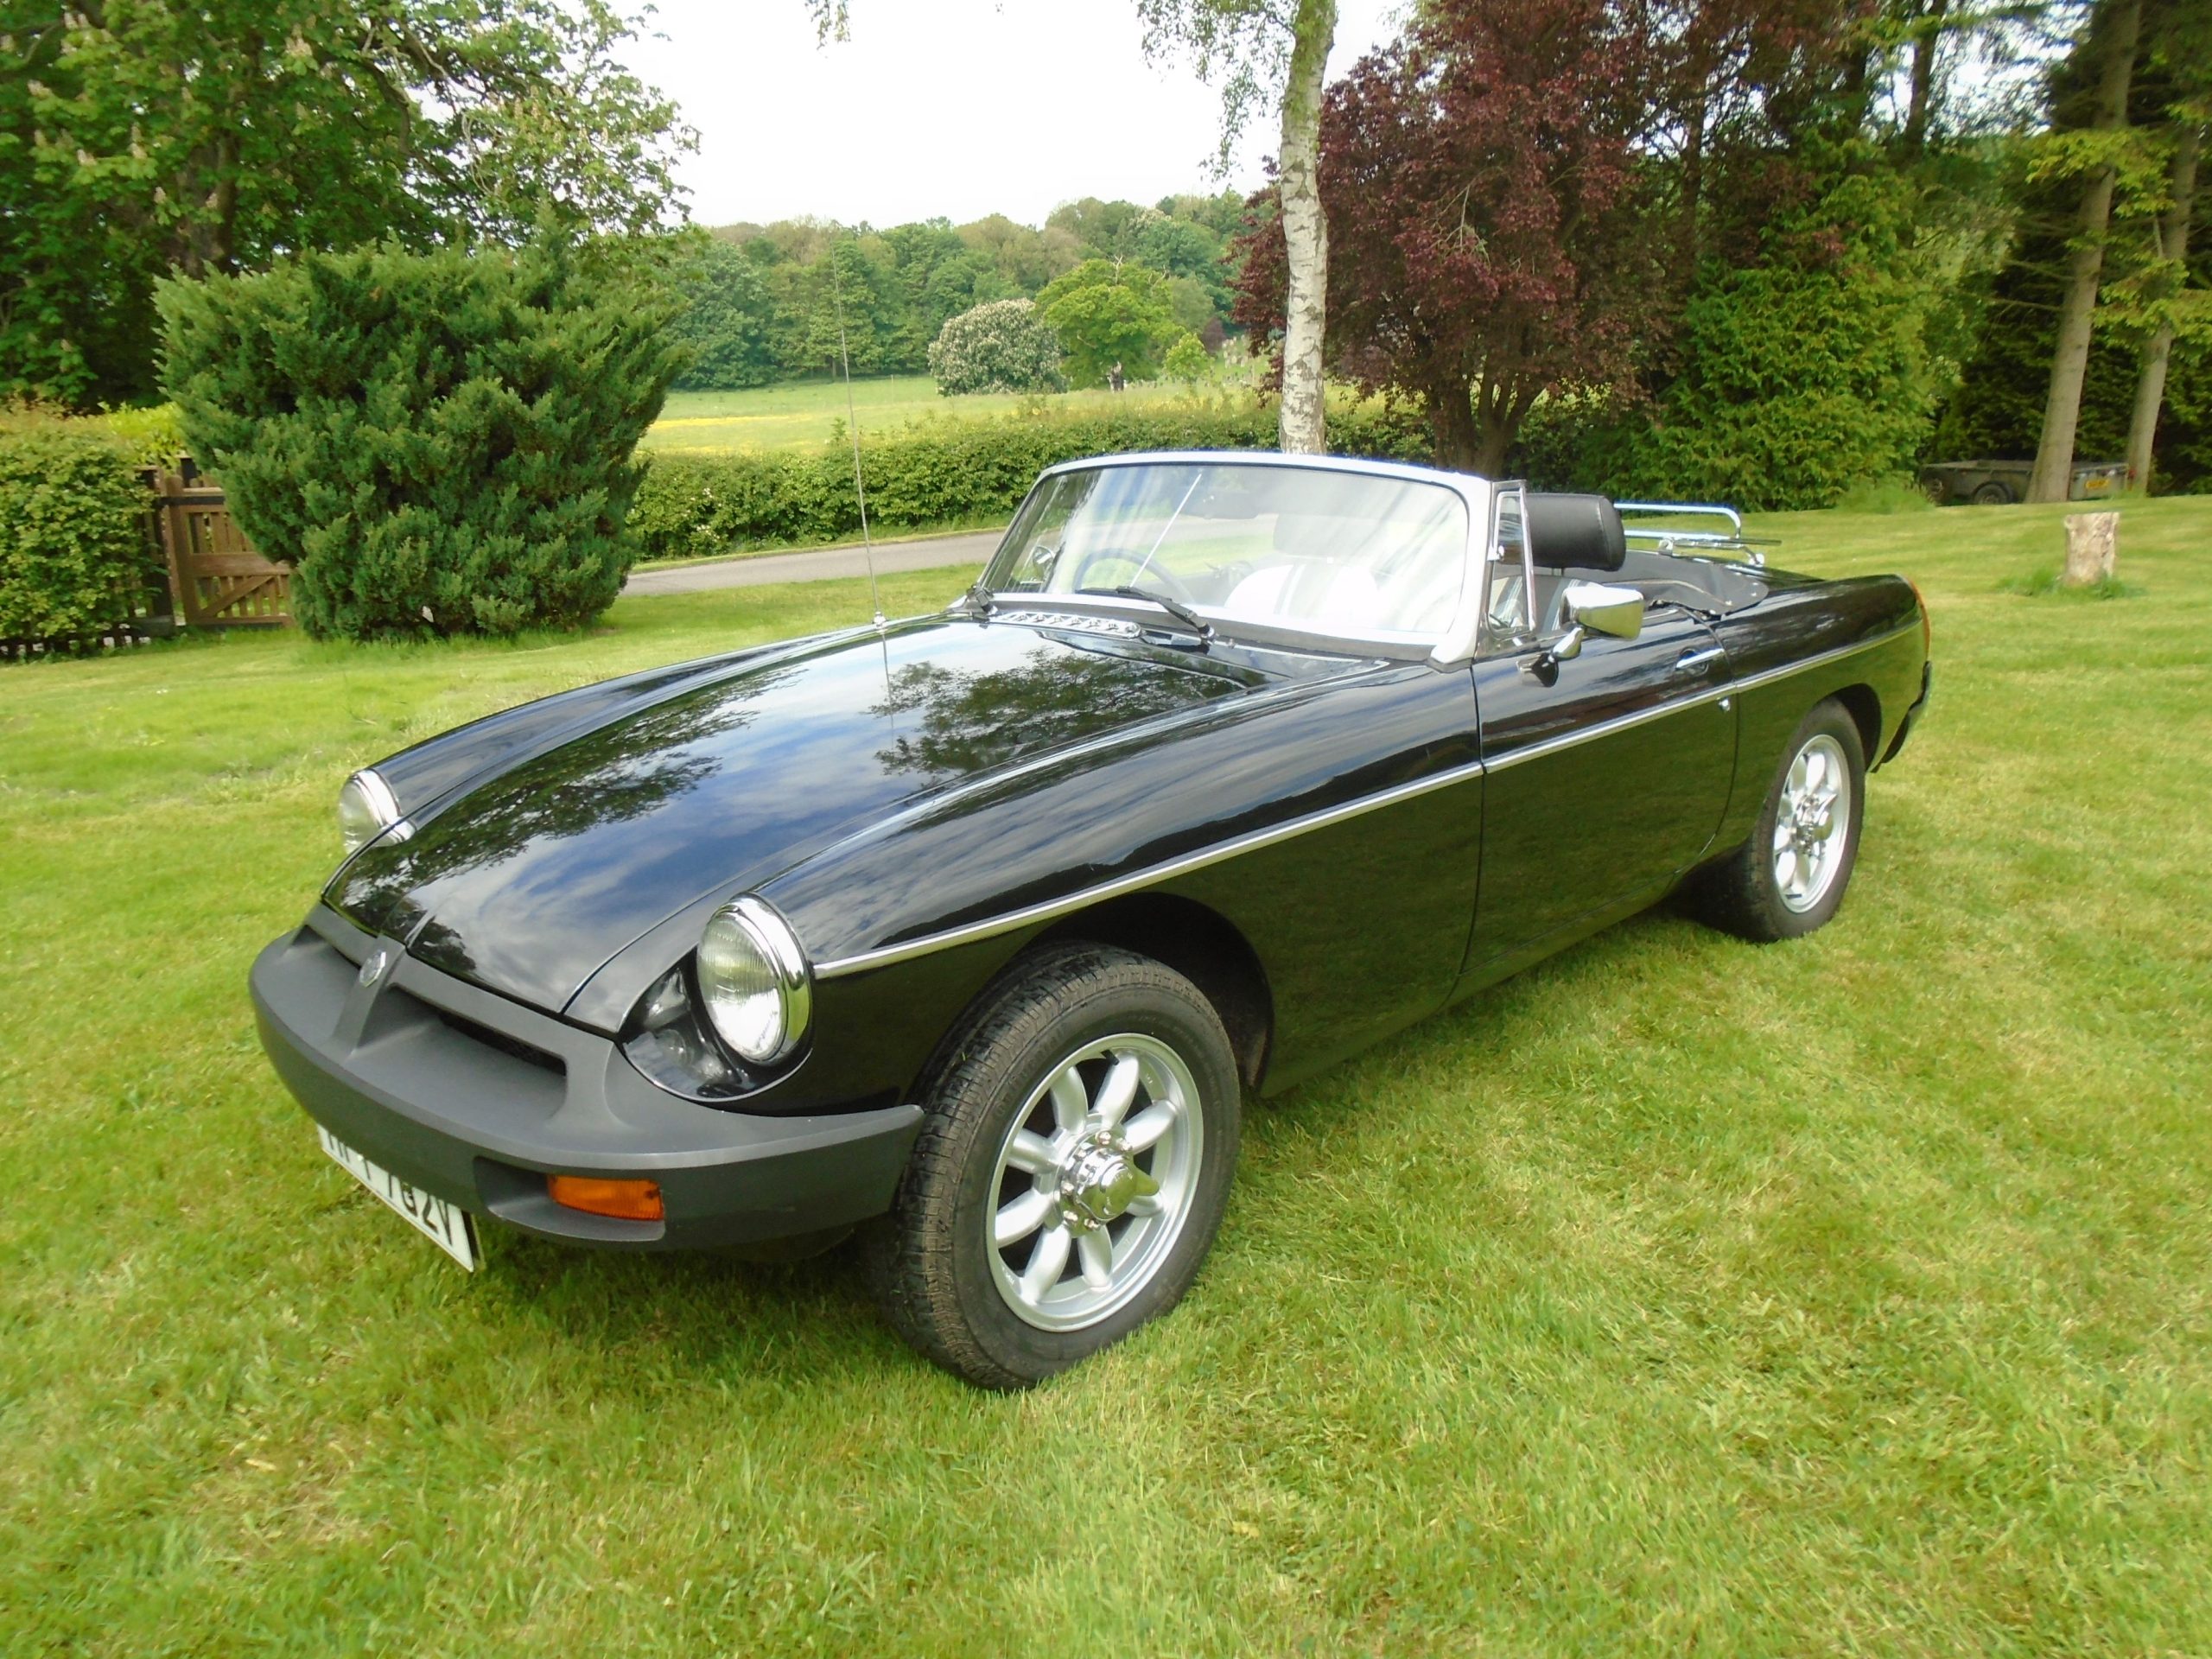 1980 MGB Roadster with Overdrive